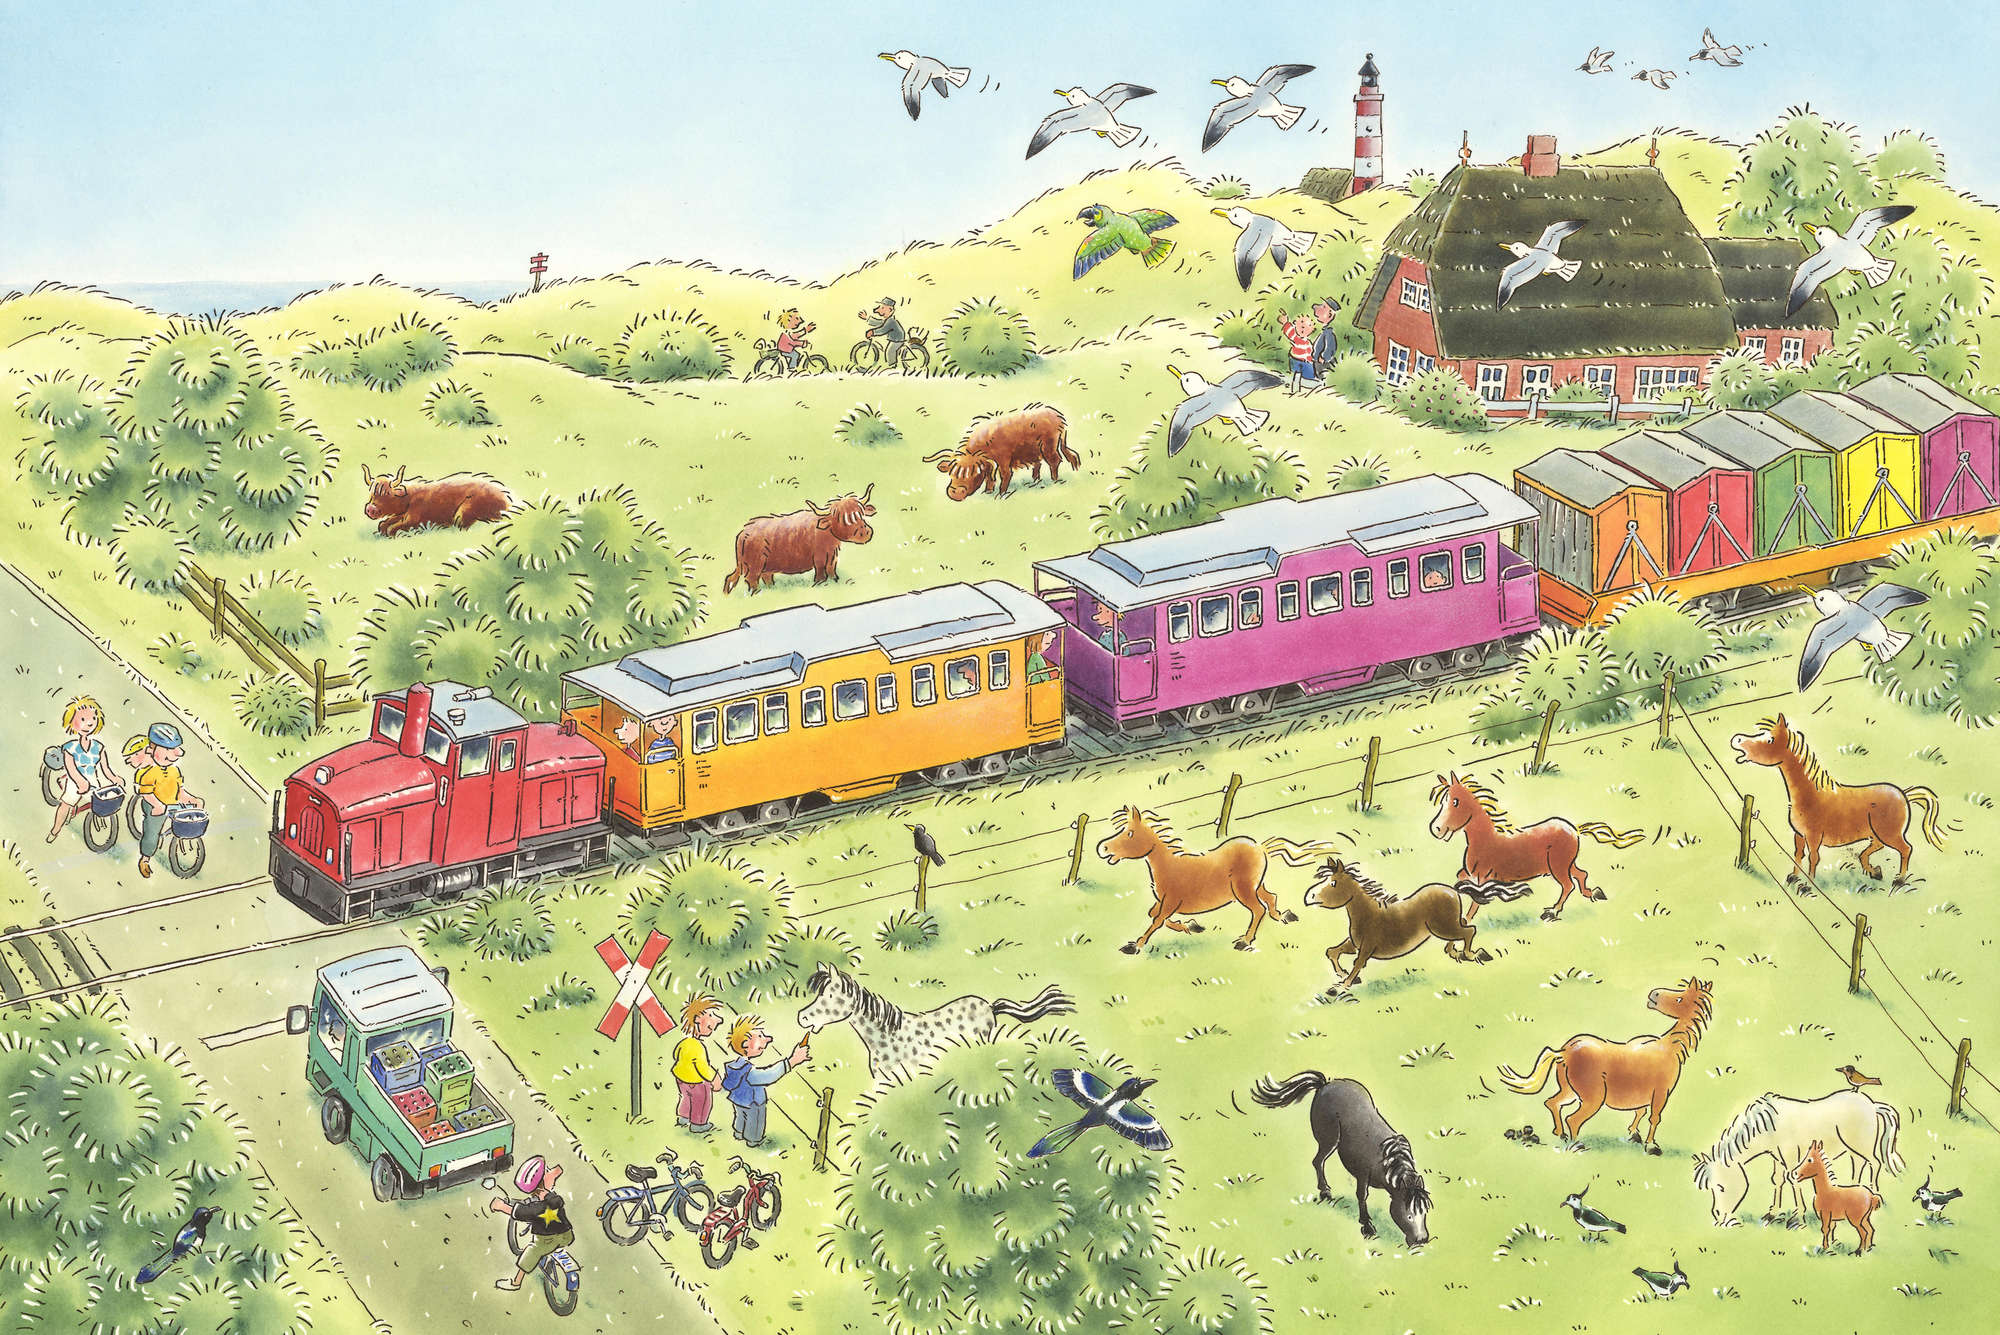             Children's mural railroad crossing with train and animals on mother of pearl smooth nonwoven
        